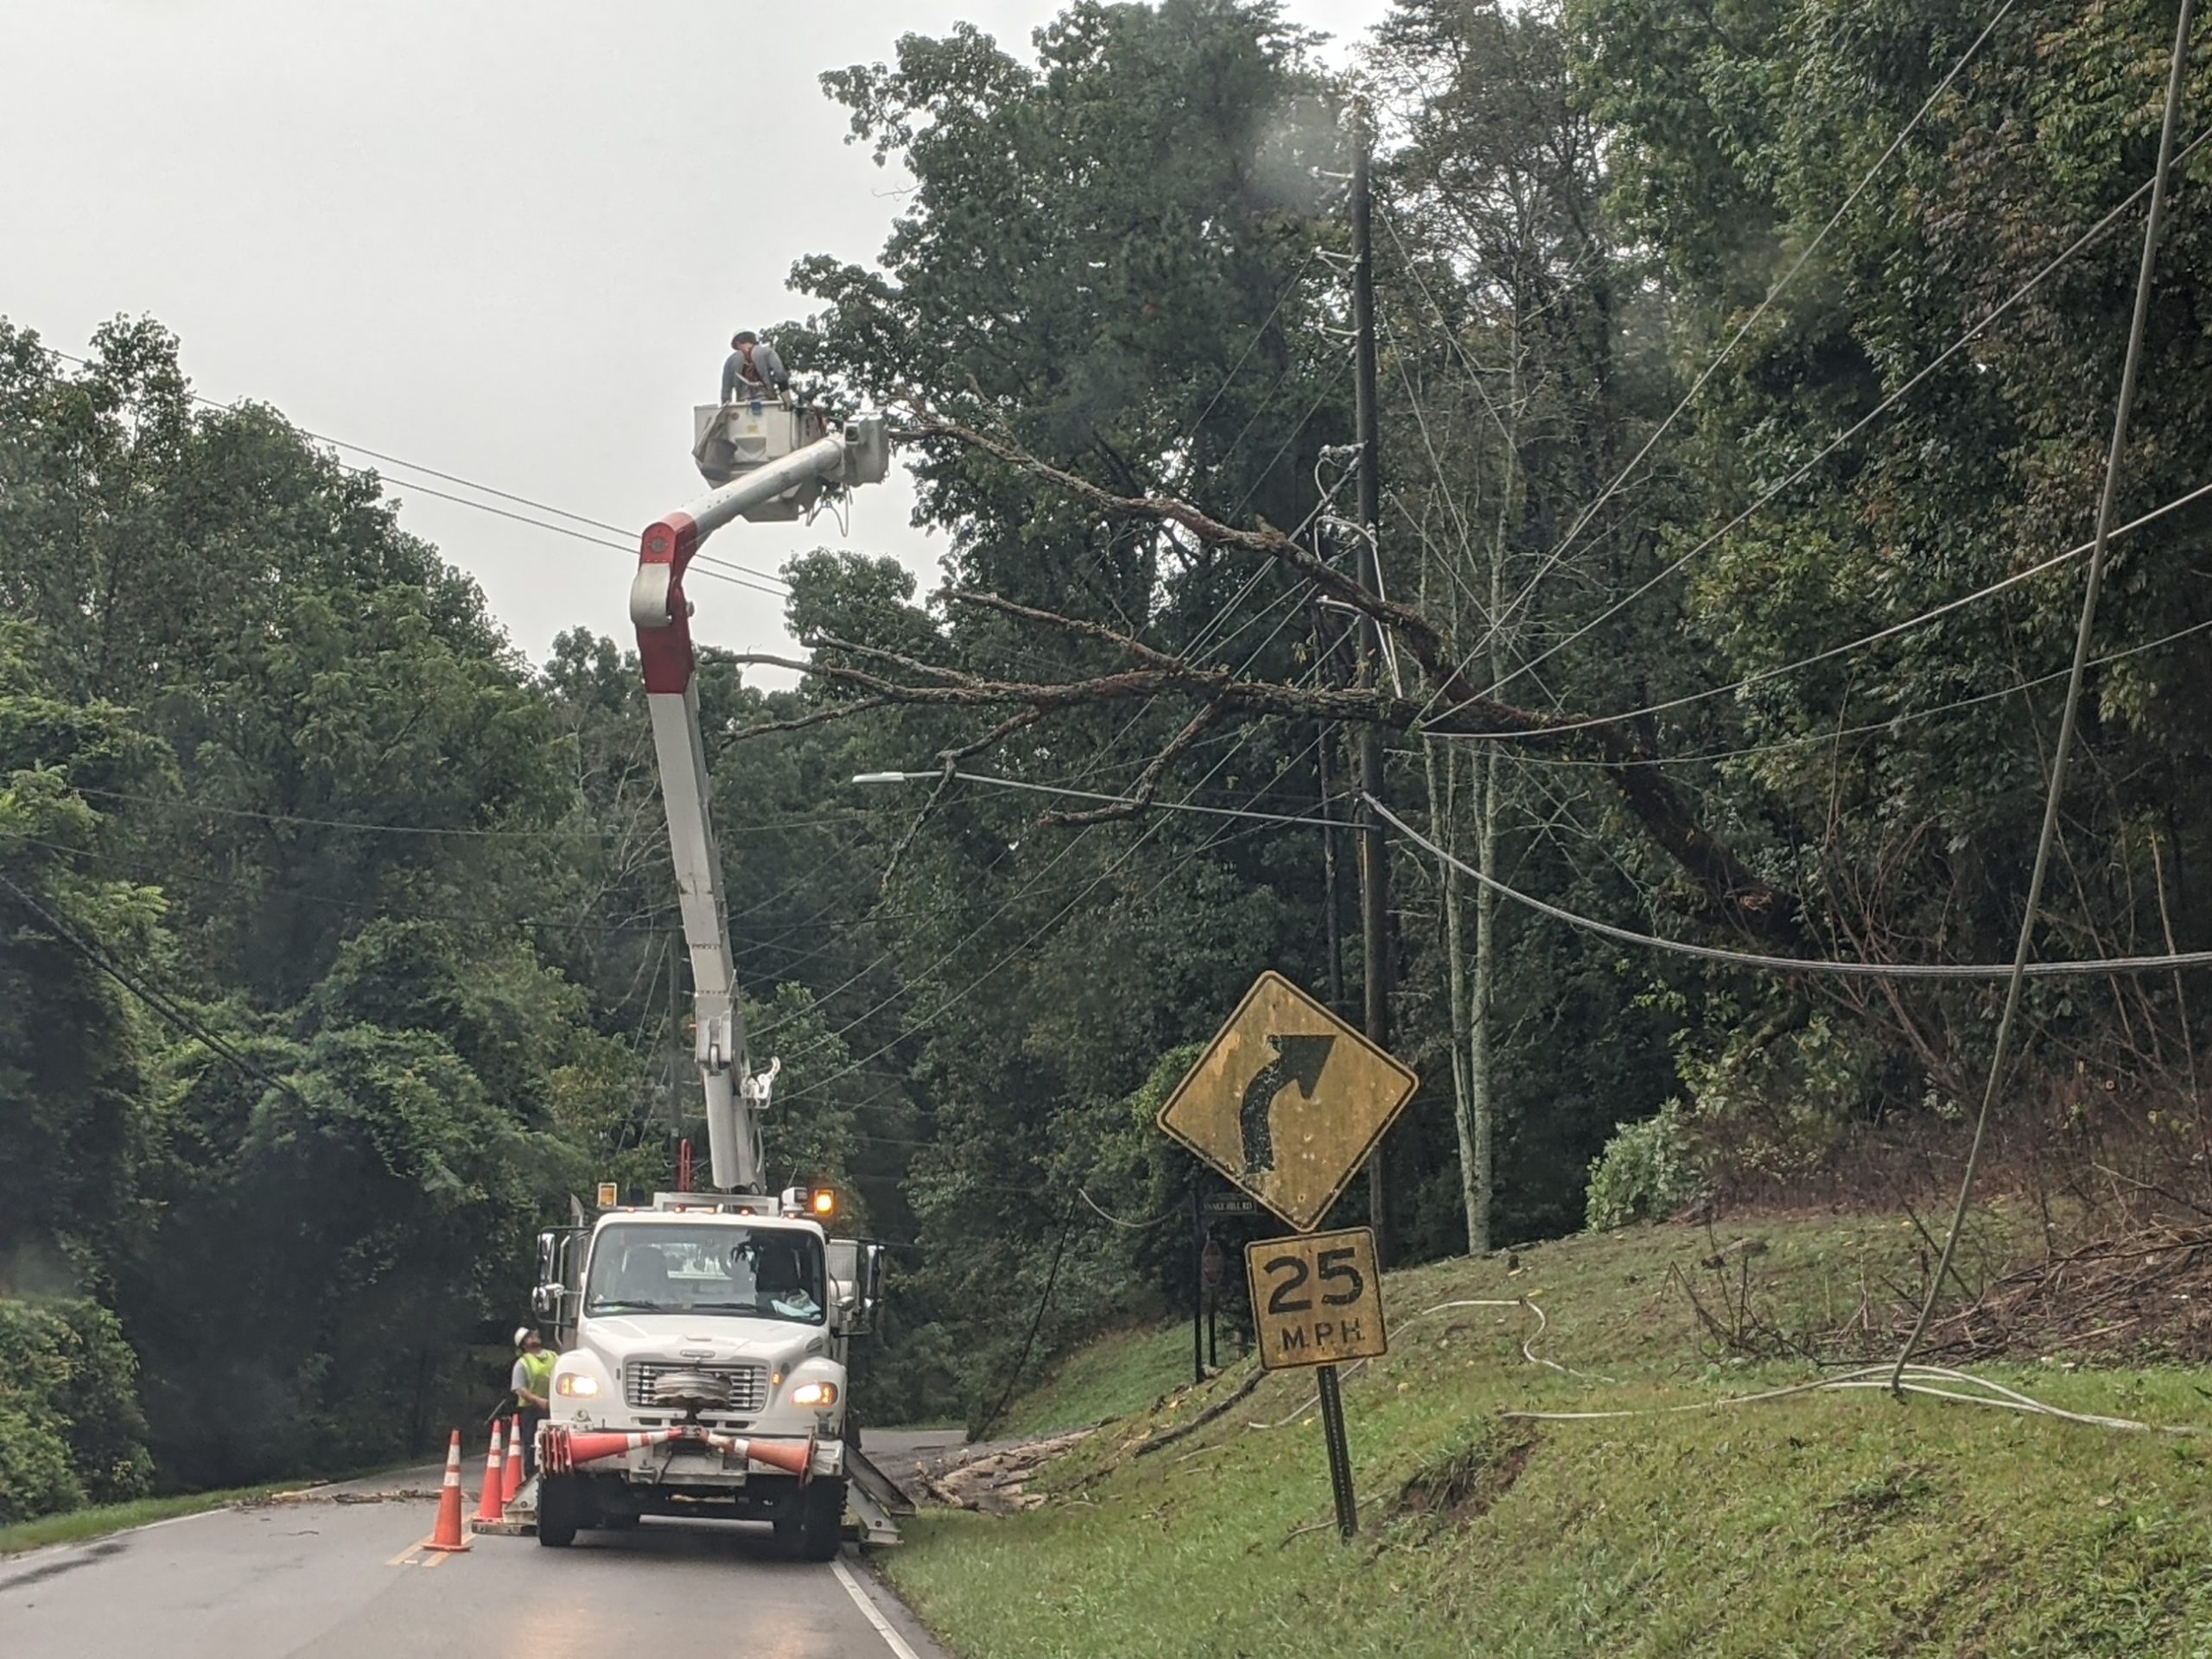 UPDATED: TCS cancels bus service in parts of Trussville due to downed power lines